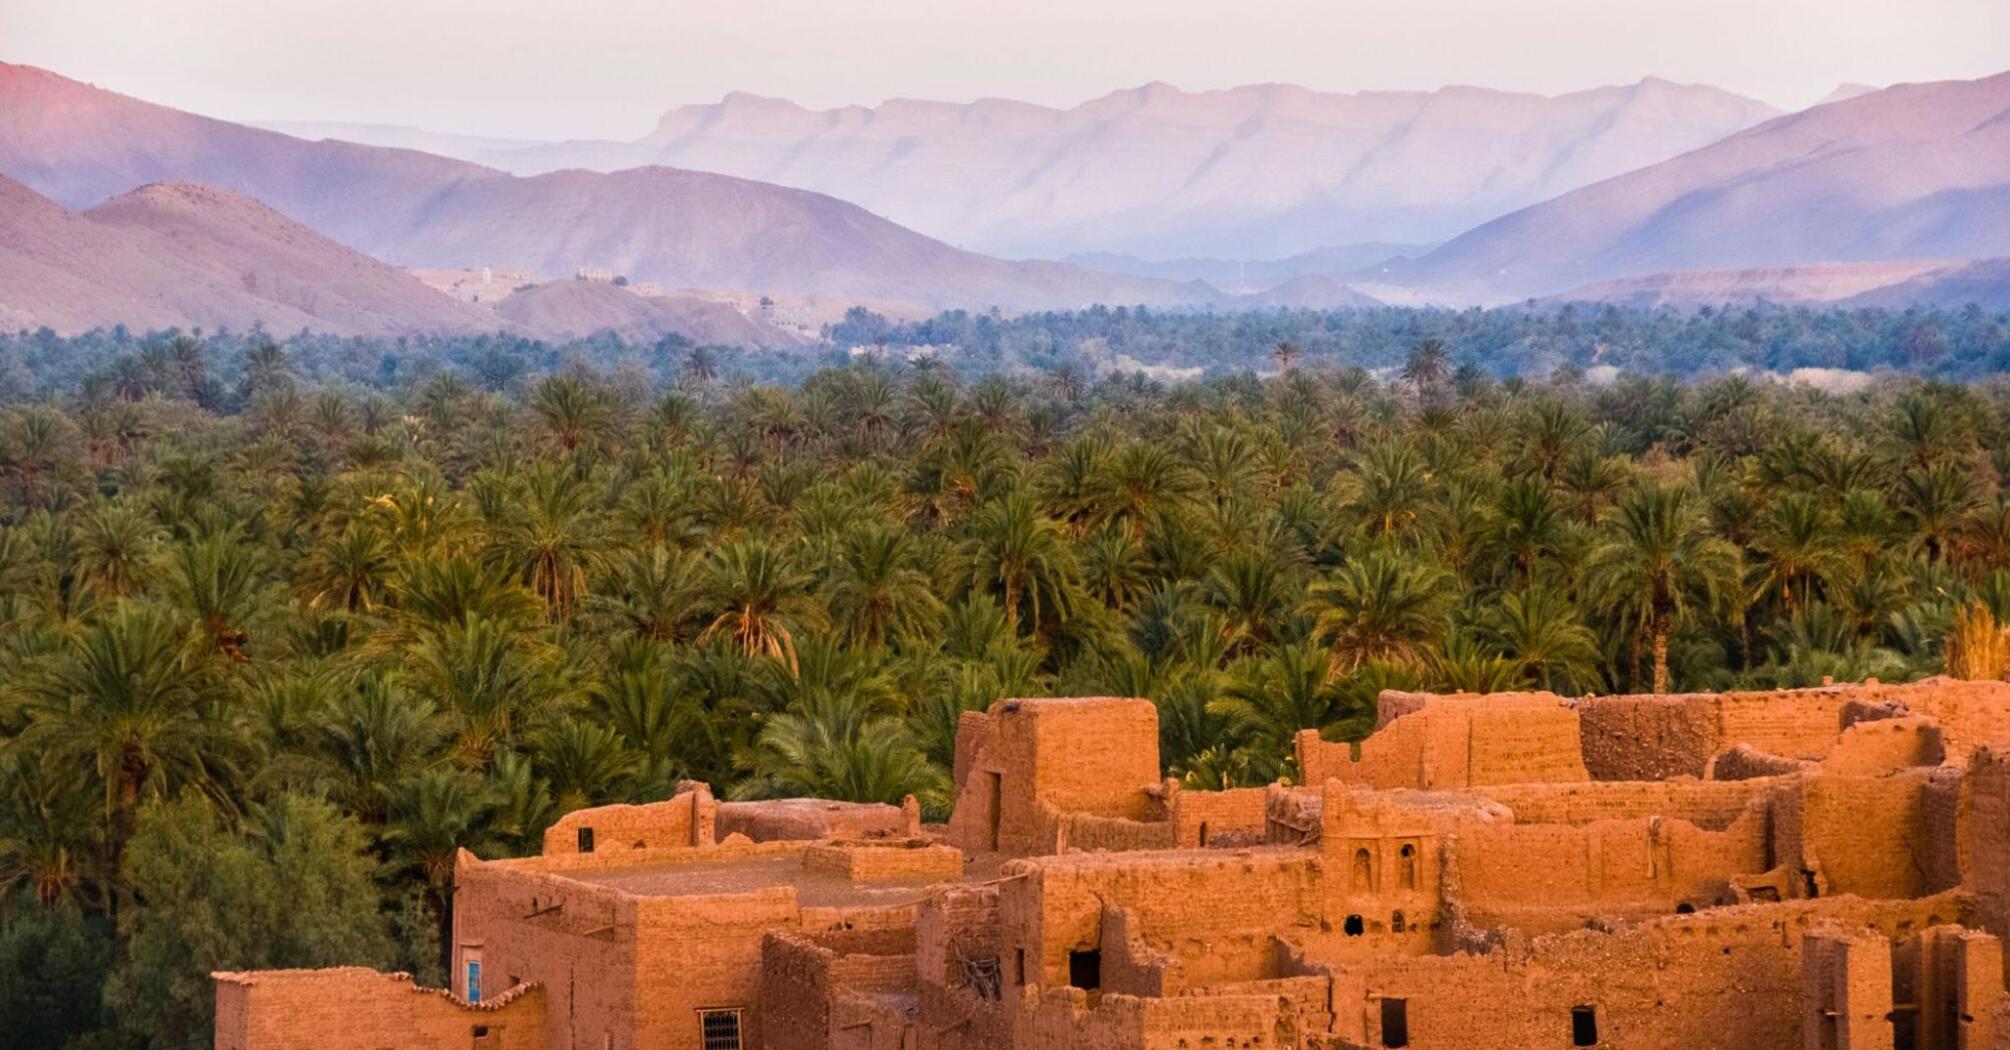 Old houses surrounded by trees and mountains in Morocco